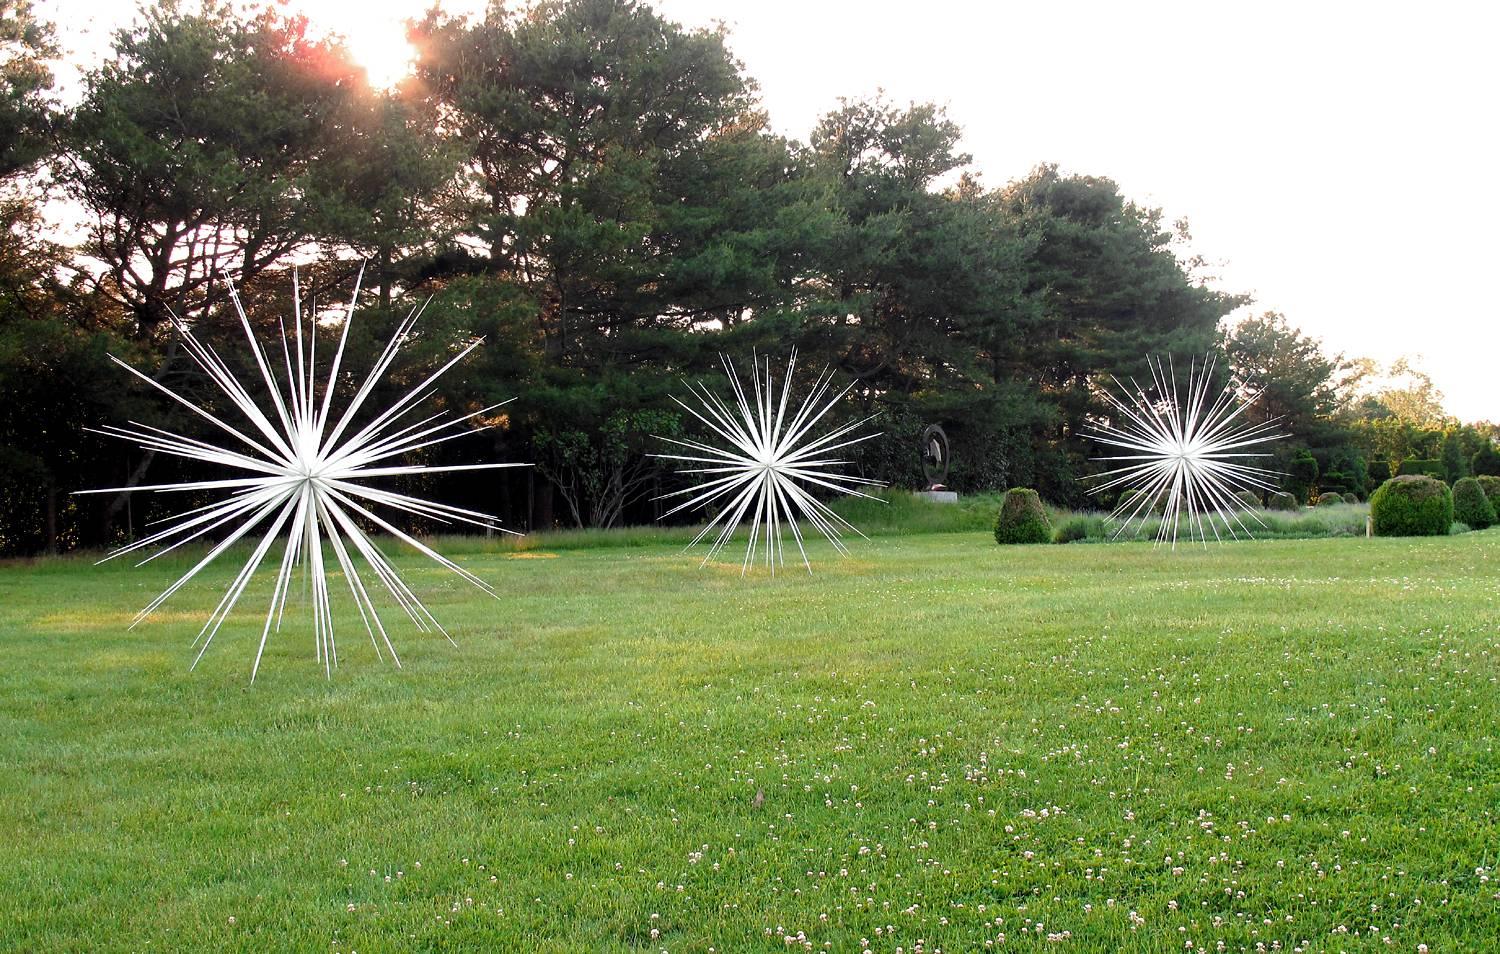 "Windseeds", Large Outdoor Aluminum Sculpture, Abstract, White